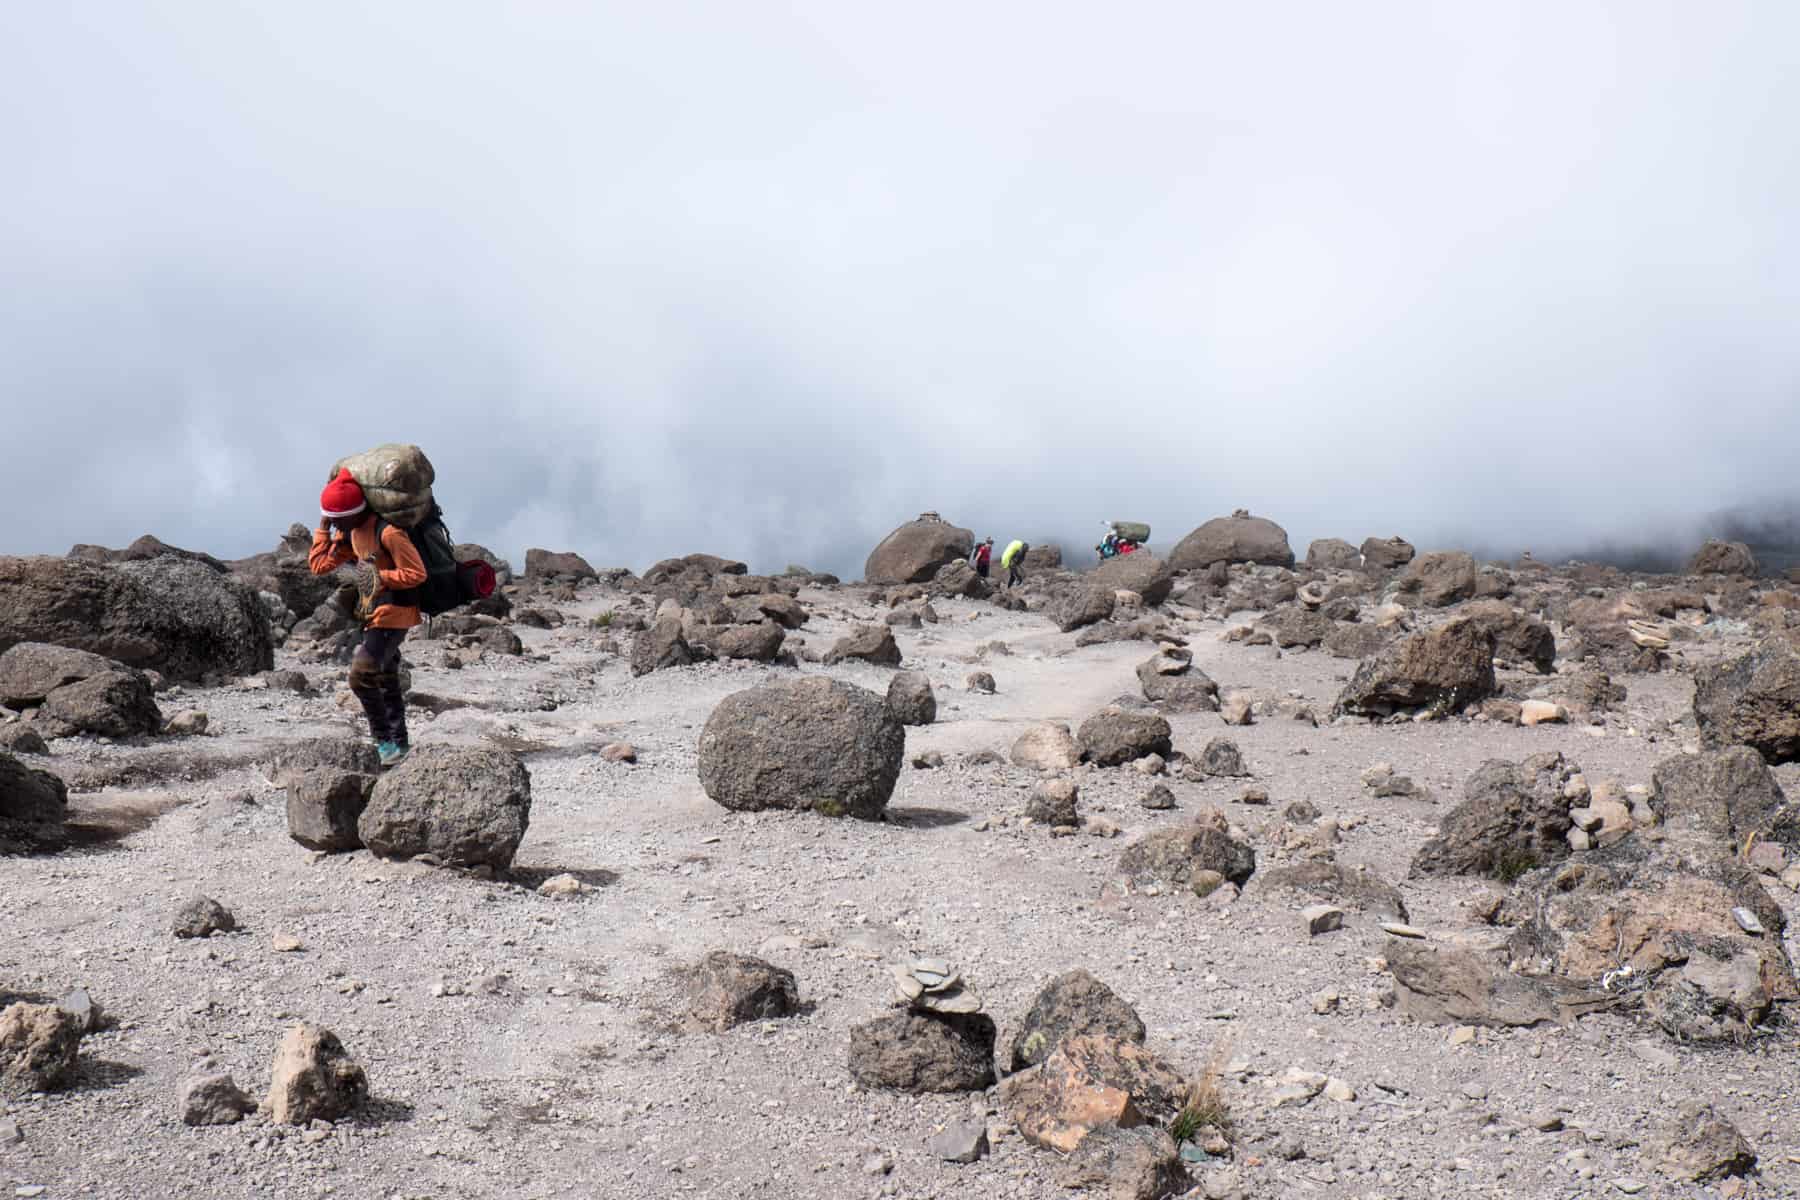 A Kilimanjaro porter wearing orange and carrying a large grey sack on his back walks through a barren grey-brown landscape strewn with large rocks. Mist rises behind him. 